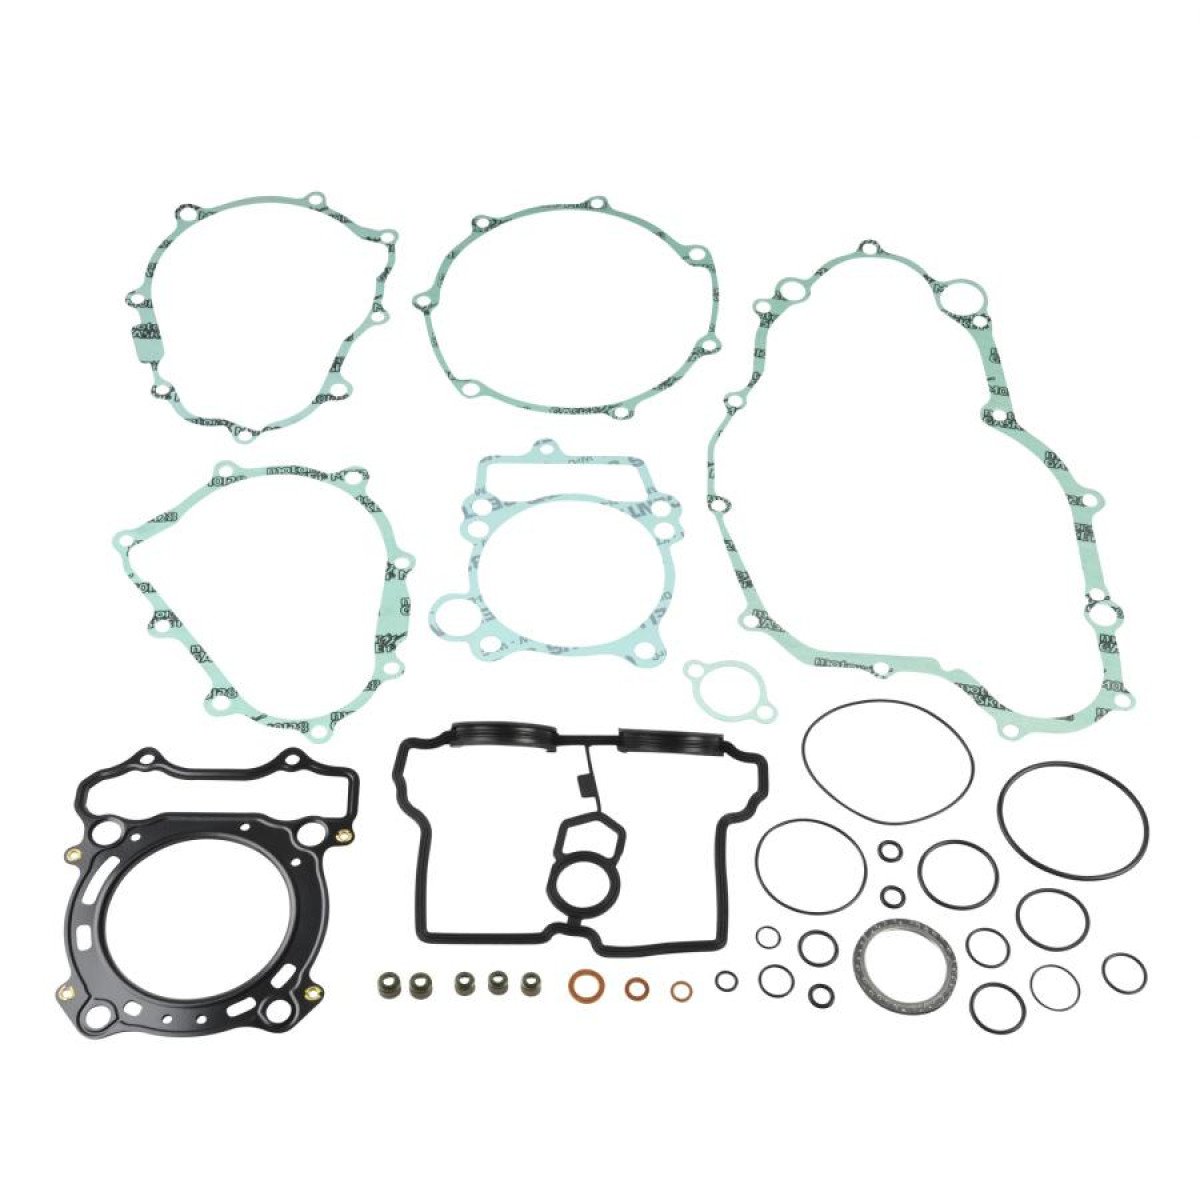 Athena Kit de Joints complet  Yamaha YZF/WRF 250 01-13, Gas Gas EC-F 250/300 13-15